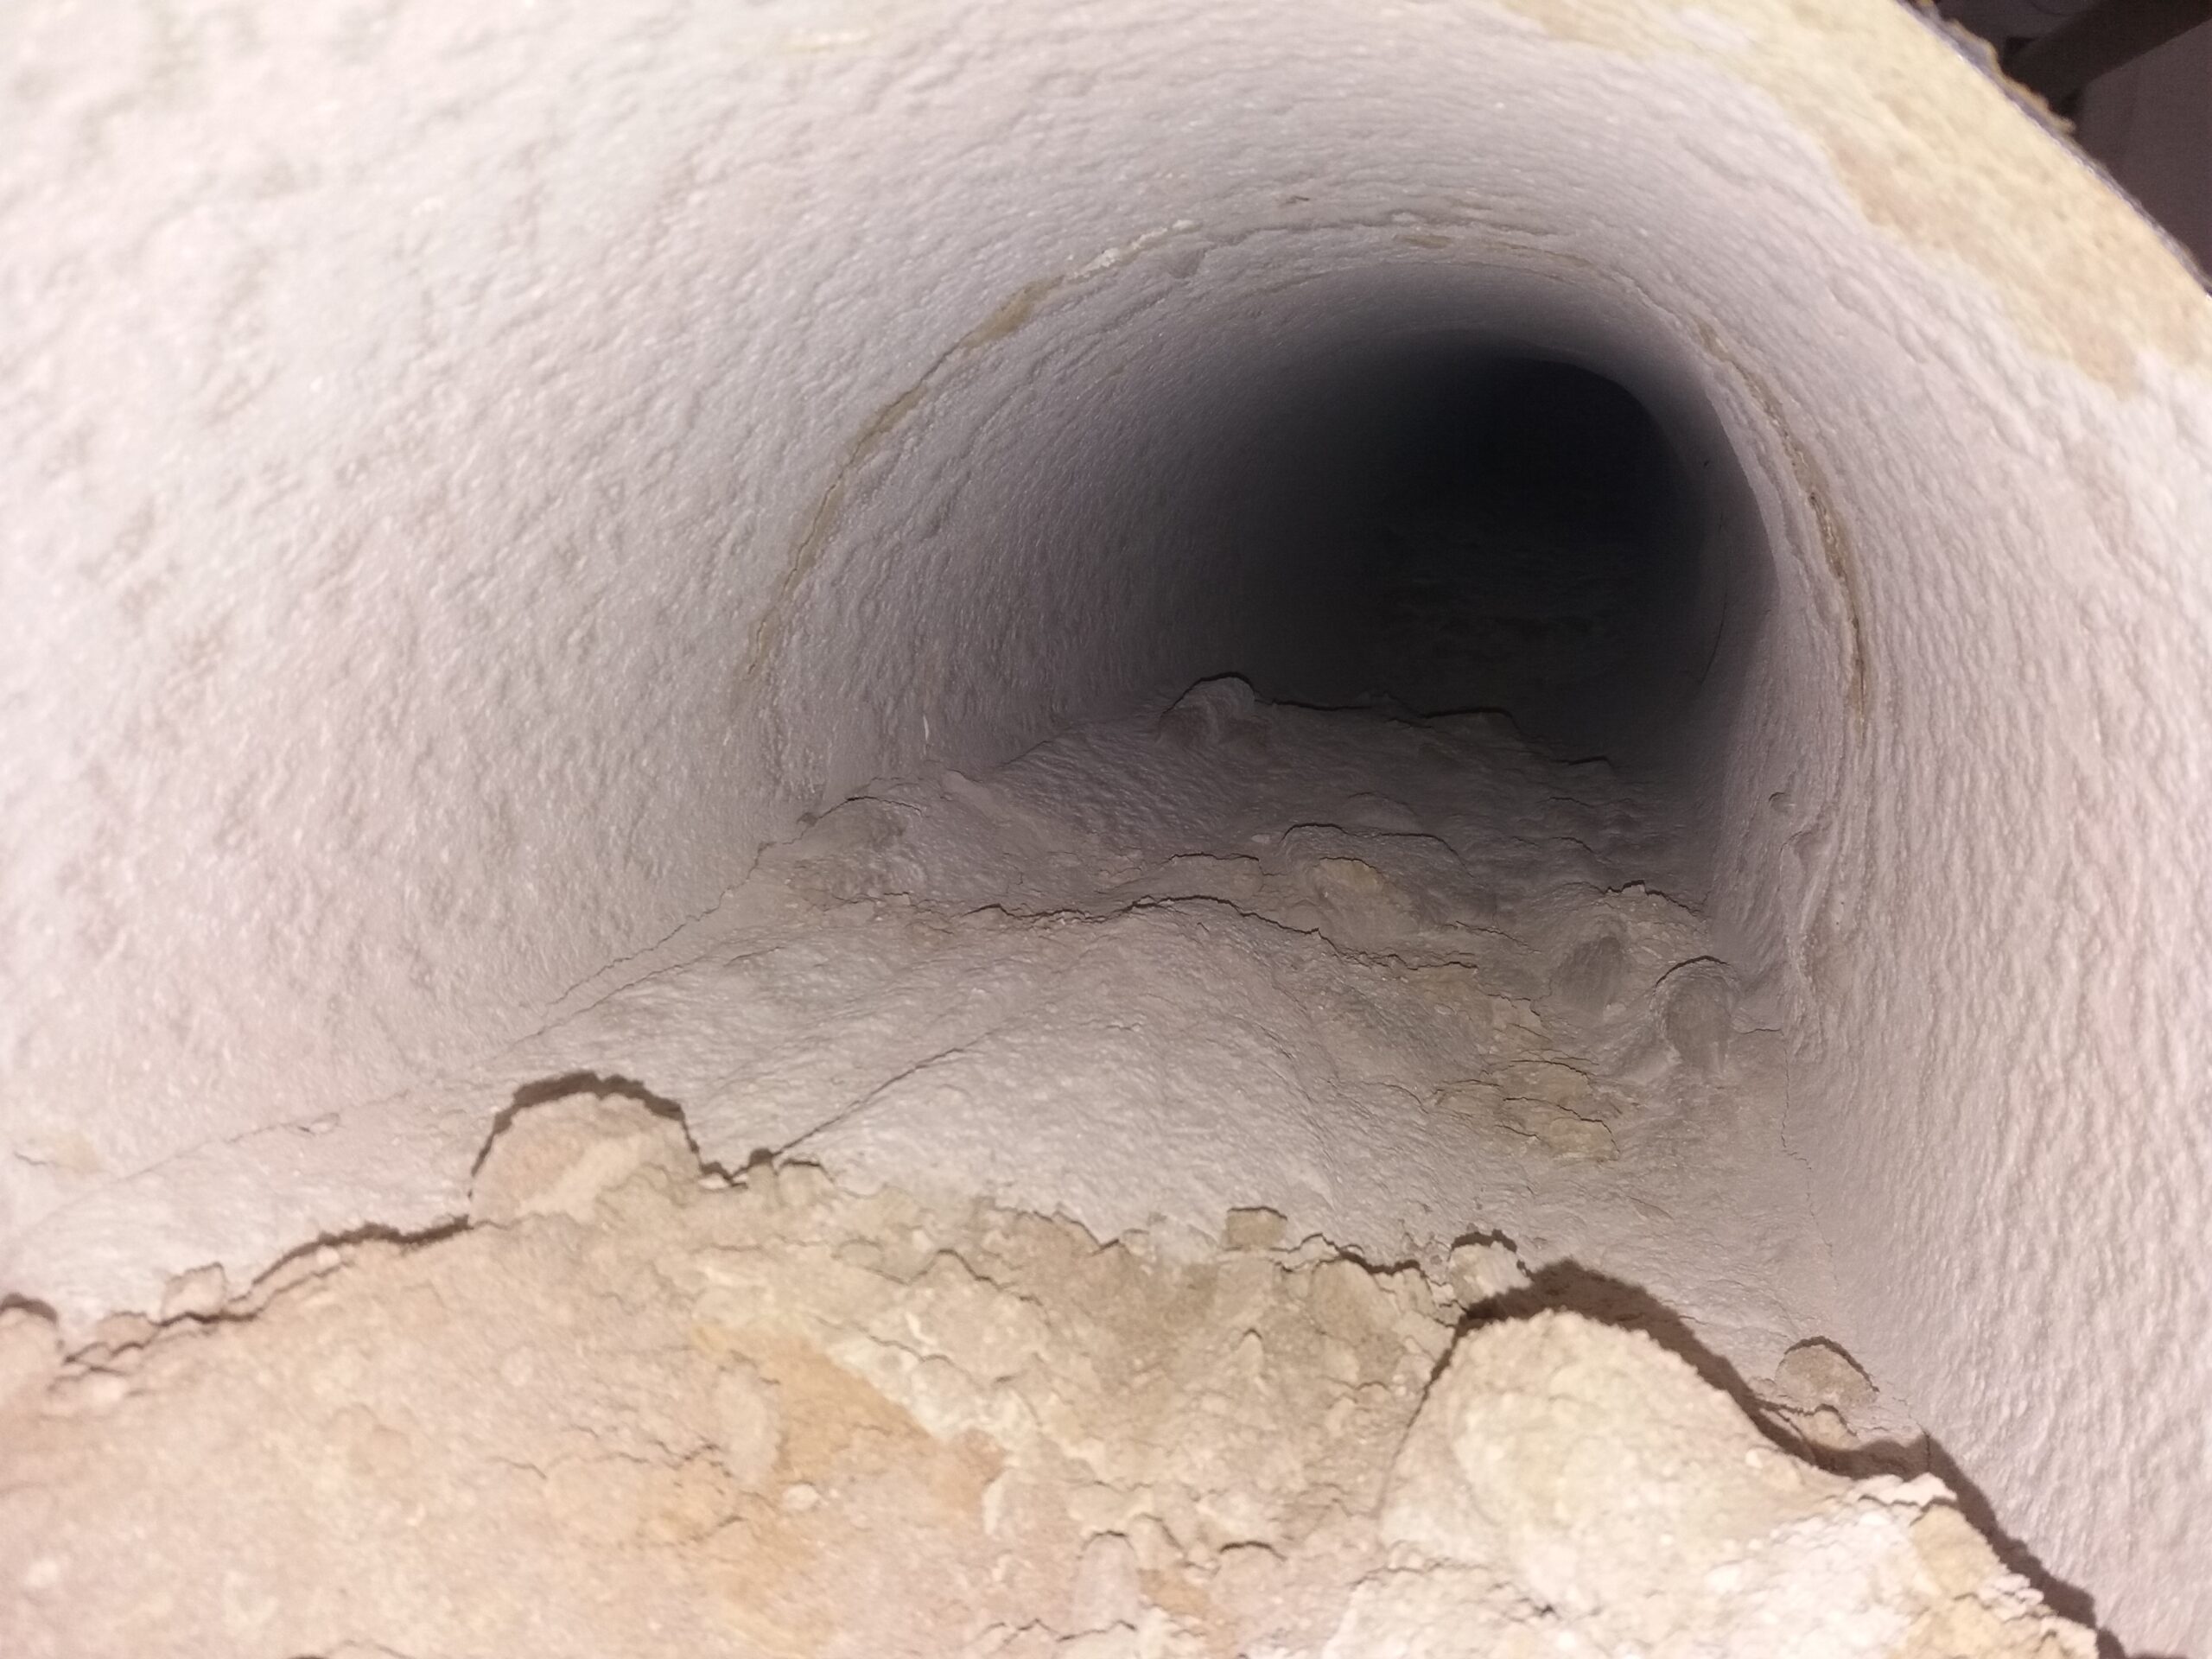 Image of dirty duct